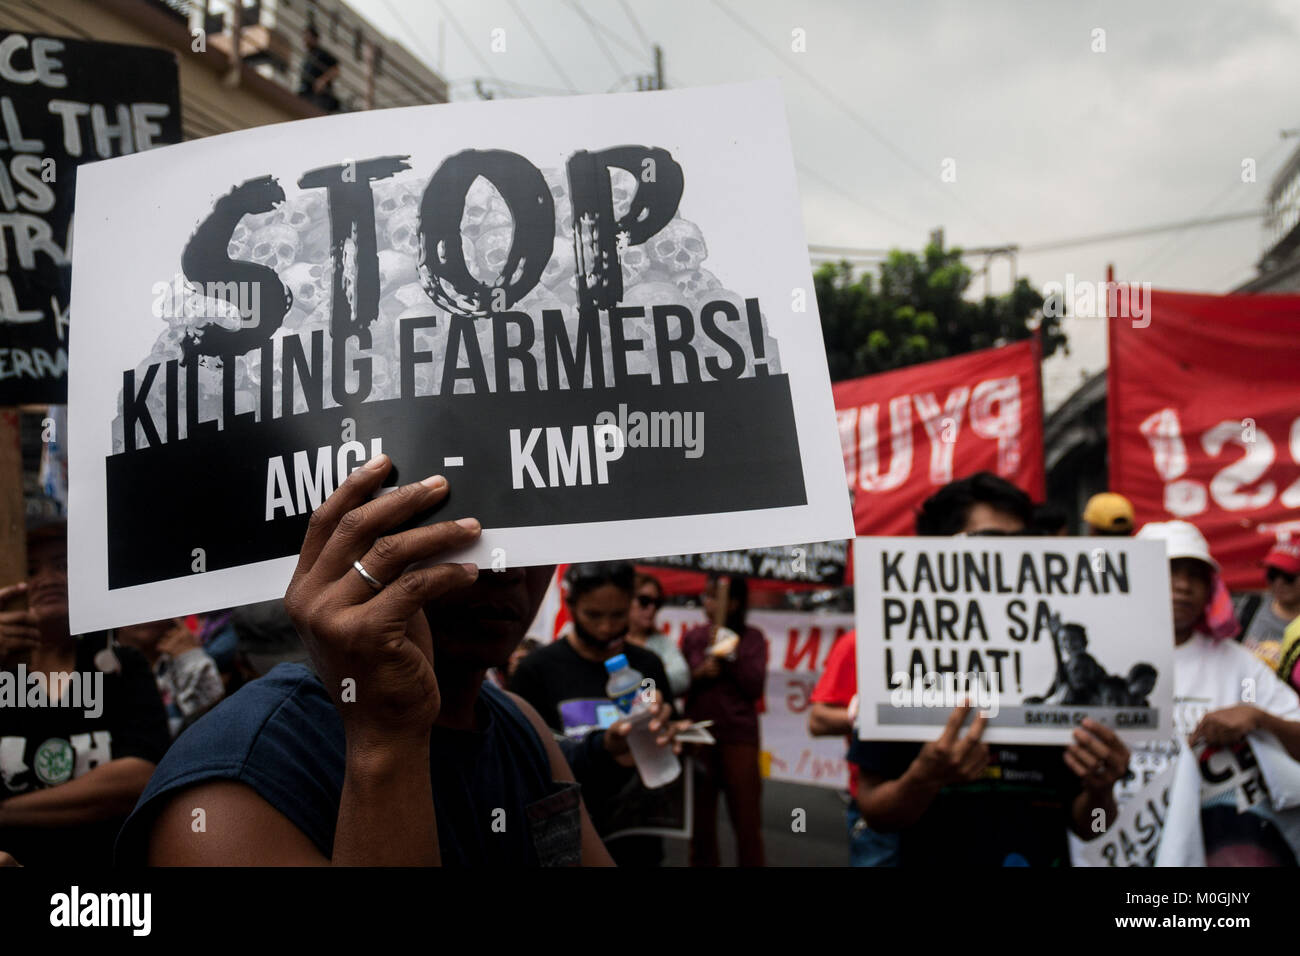 Philippines. 22nd Jan, 2018. Peasant farmers marched to Mendiola Bridge in Manila to commemorate the 31st anniversary of the protest rally in which 13 protesters were killed by state police. The Kilusang Magbubukid ng Pilipinas (KMP), called for genuine land reform and the distribution of lands to the peasant farmers. They are also against ChaCha (Charter Change) by President Duterte as this could result in 100% ownership of lands by foreigners. Credit: J Gerard Seguia/ZUMA Wire/Alamy Live News Stock Photo